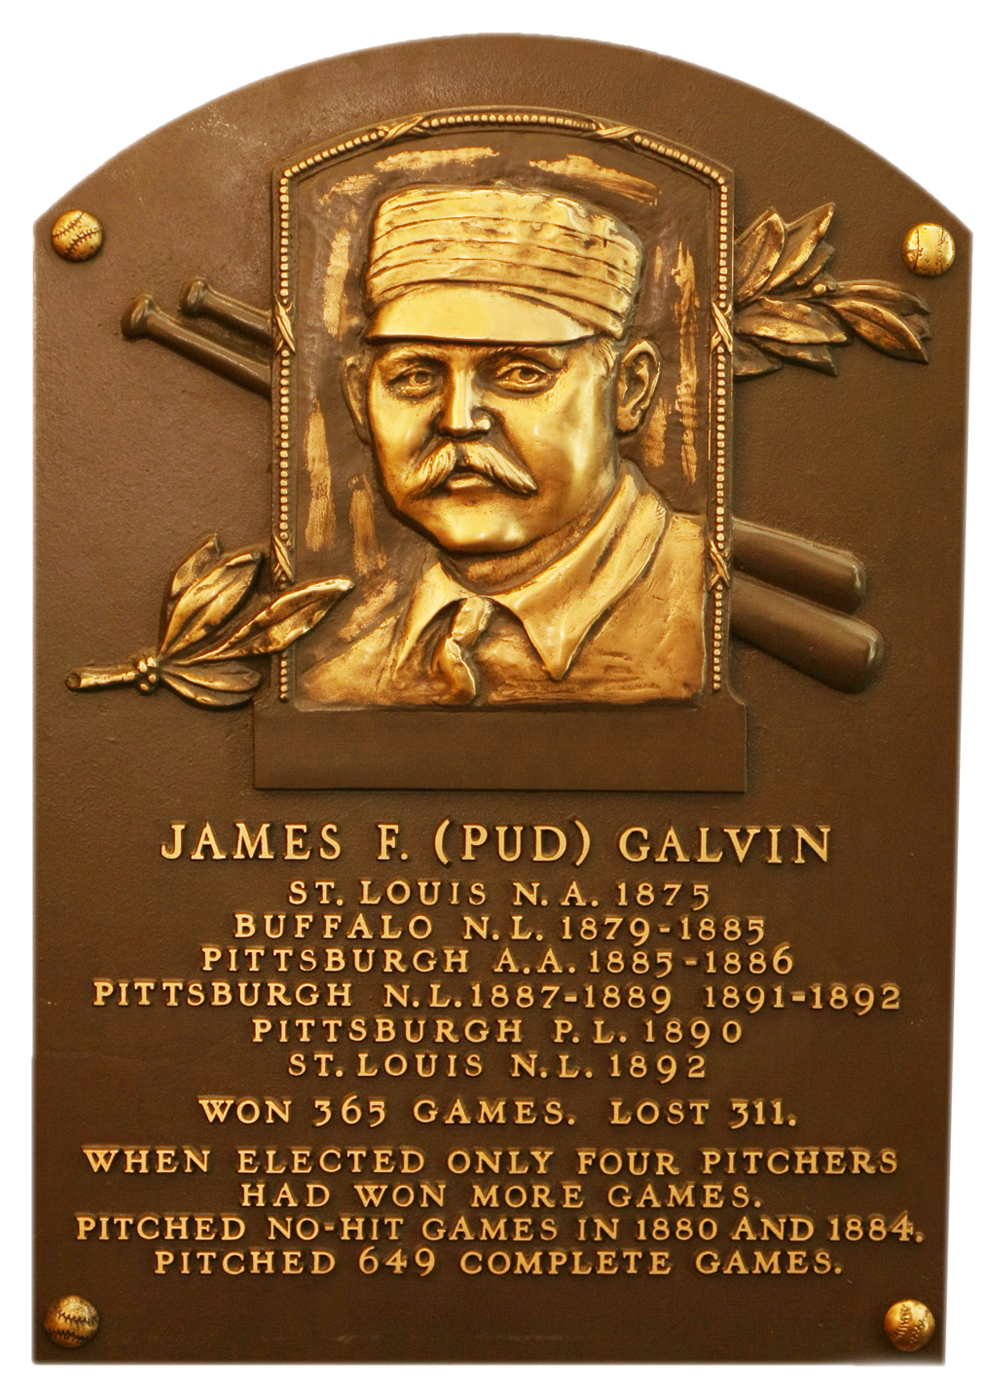 Pud Galvin Hall of Fame plaque